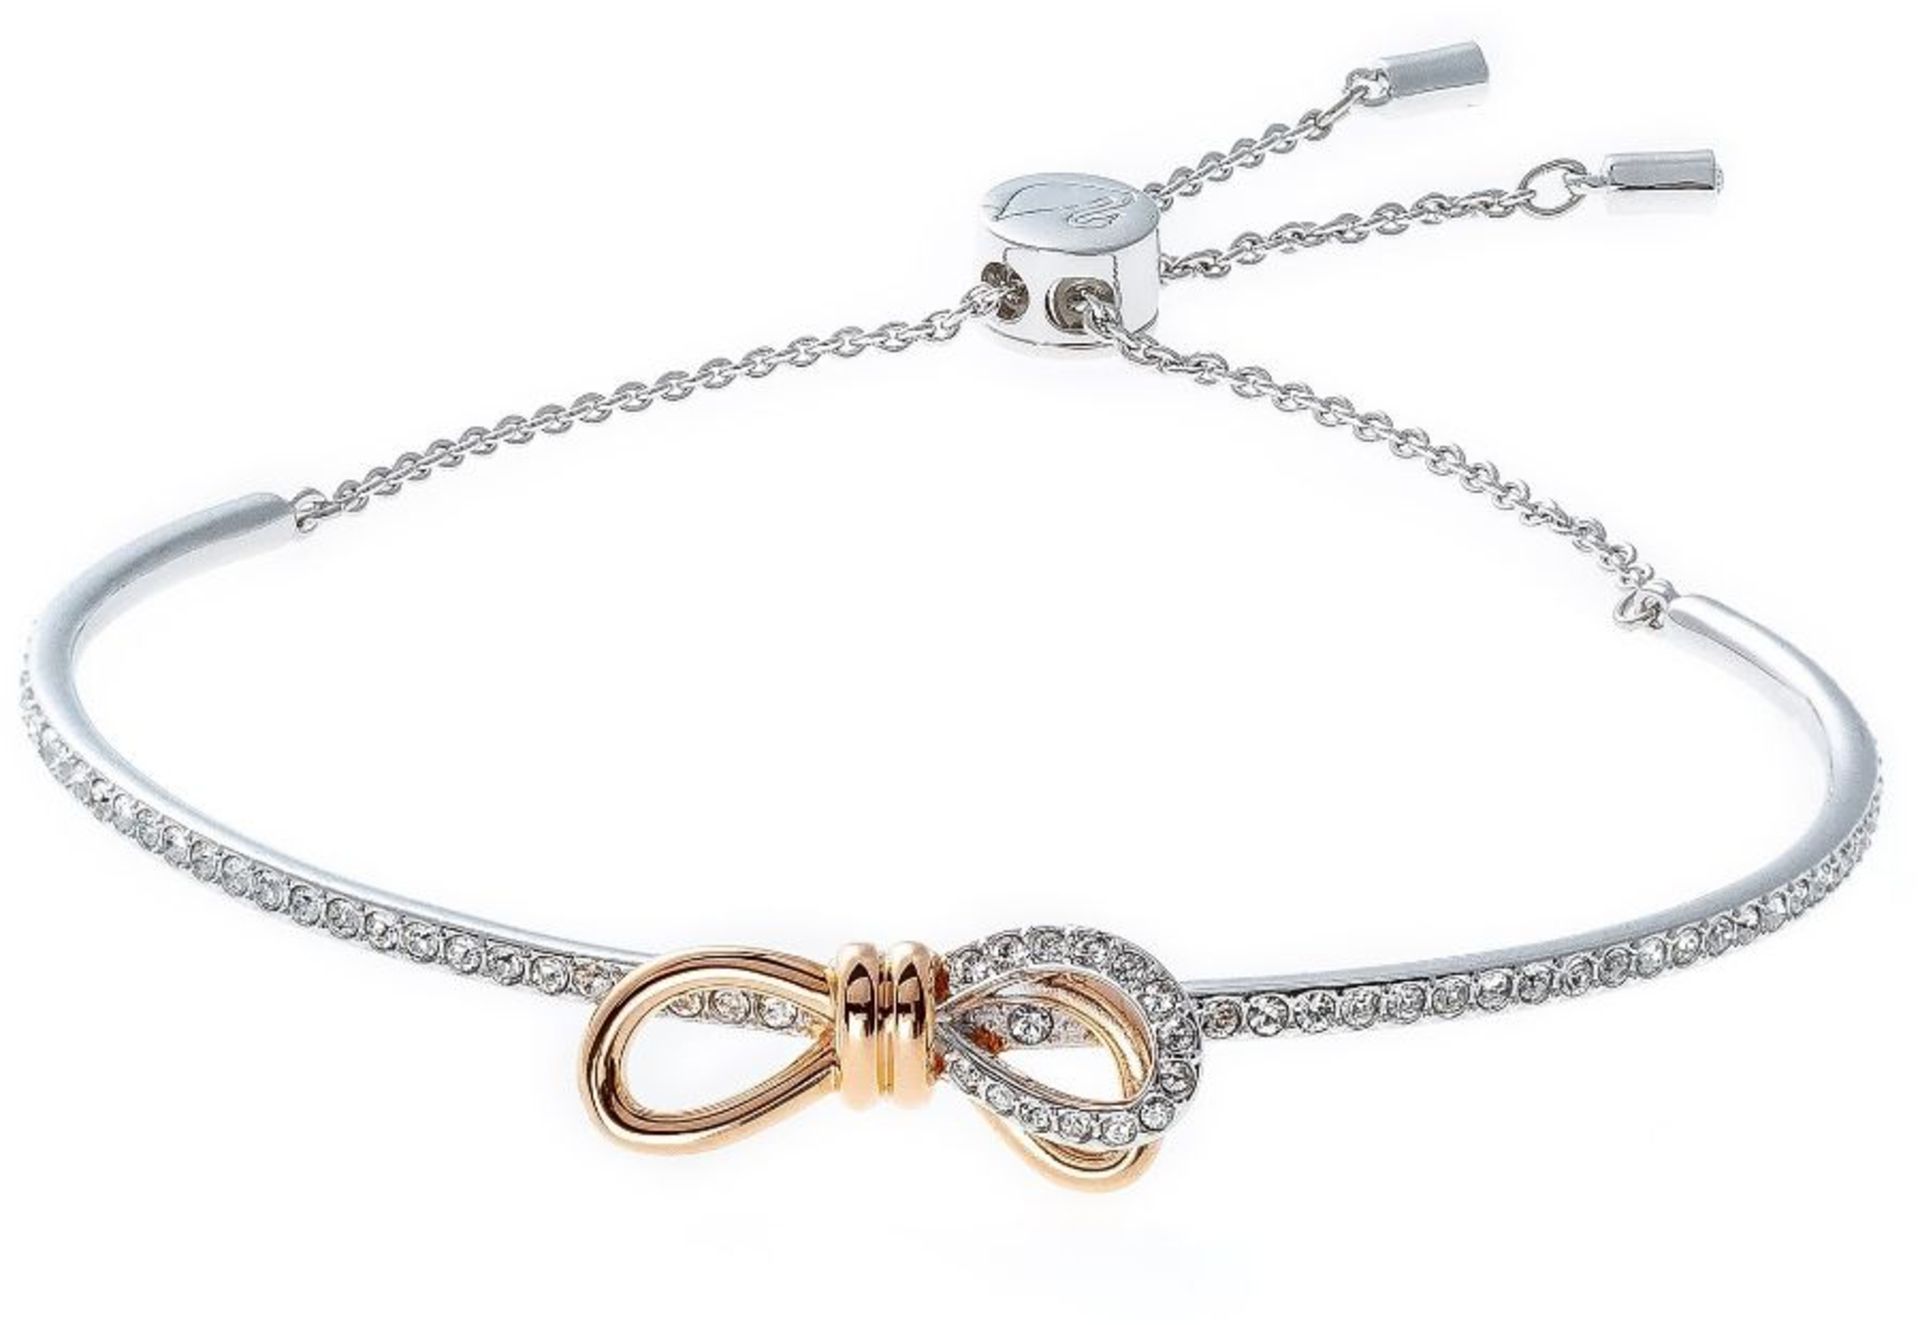 Swarovski 5447079 lifelong Bow Crystal and mixed metal bracelet, new in presentation box and gift